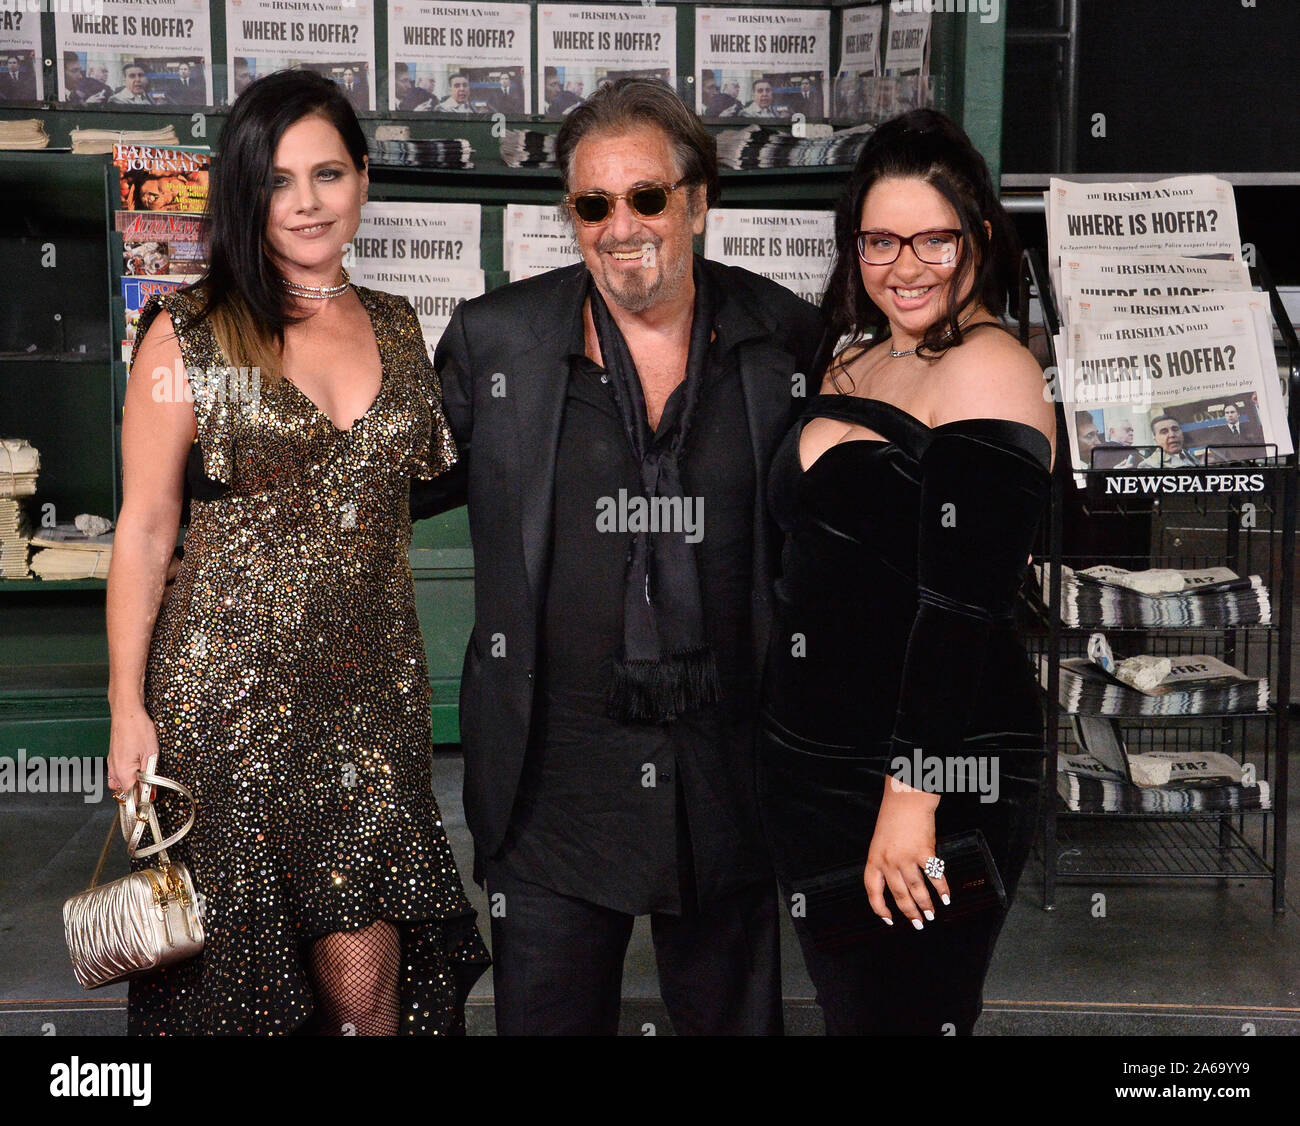 Los Angeles, United States. 24th Oct, 2019. Cast member Al Pacino and Israeli actress Meital Dohan and his daughter Olivia Pacino (R) attend the premiere of the historical crime thriller "The Irishman" at the TCL Chinese Theatre in the Hollywood section of Los Angeles on Thursday, October 24, 2019. Storyline: Frank "The Irishman" Sheeran is a man with a lot on his mind. The former labor union high official and hitman, learned to kill serving in Italy during the Second World War. Credit: UPI/Alamy Live News Stock Photo